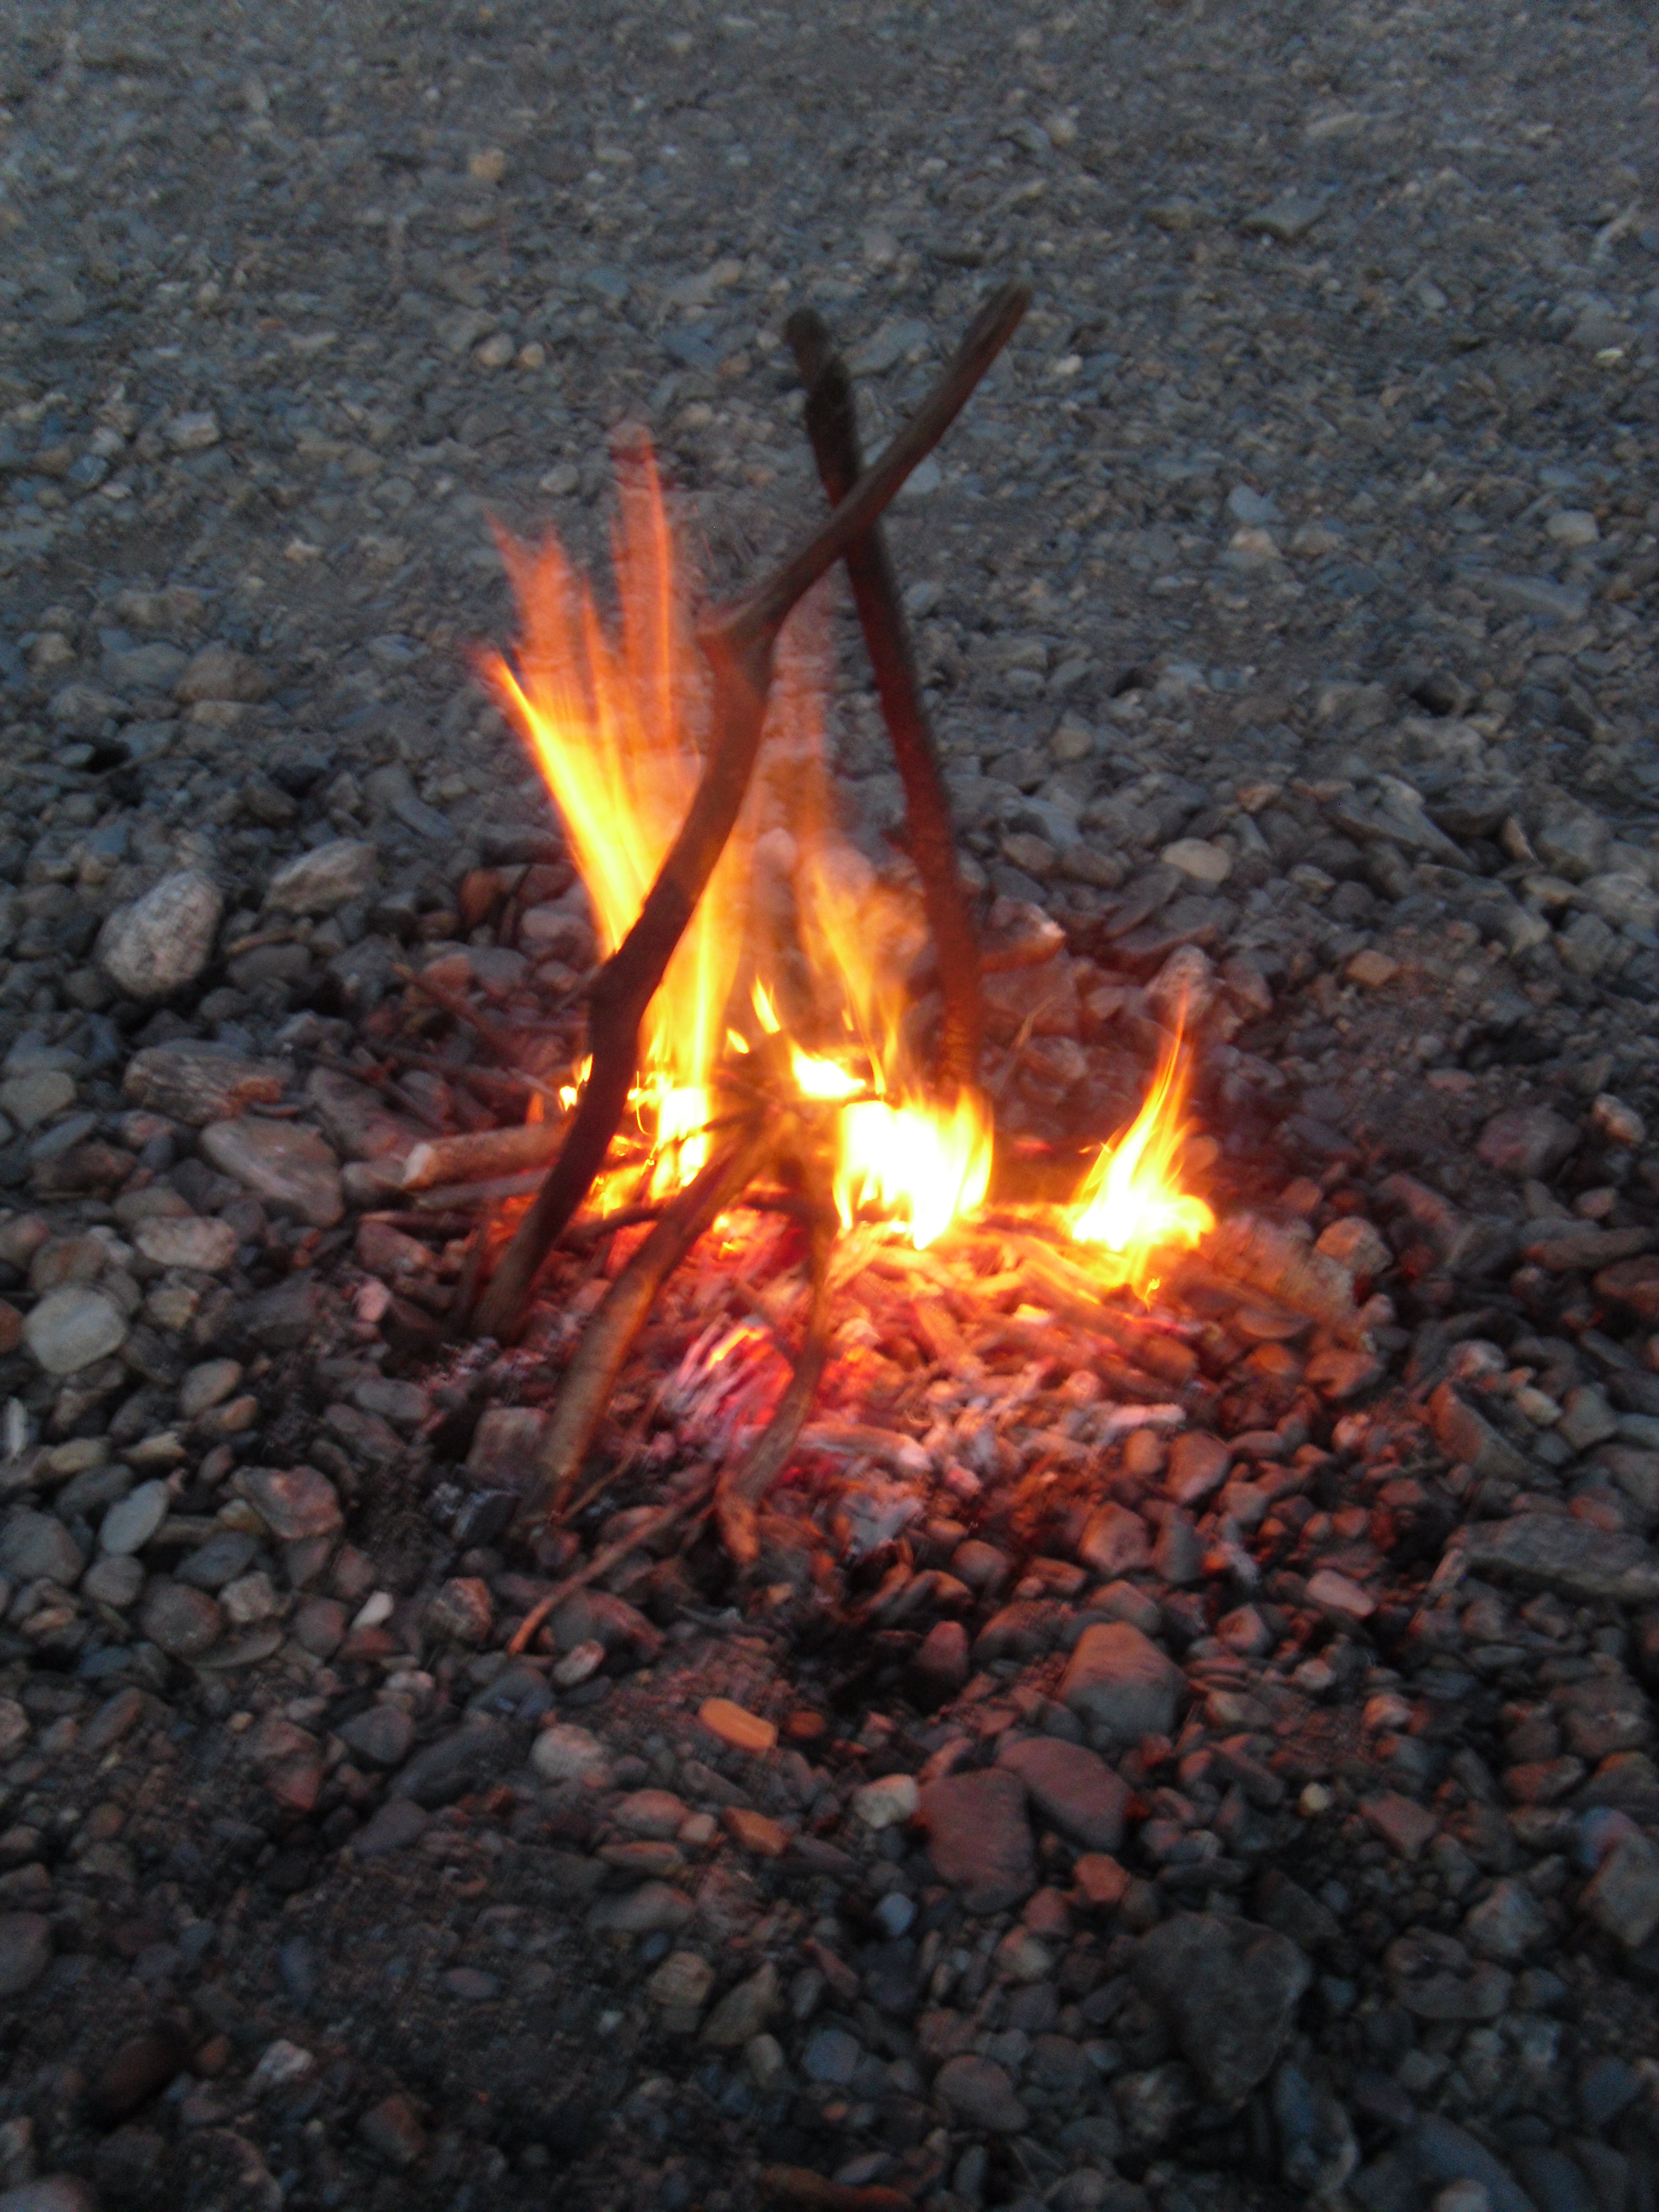 Camp Fire, Camp, Camping, Cooking, Fire, HQ Photo